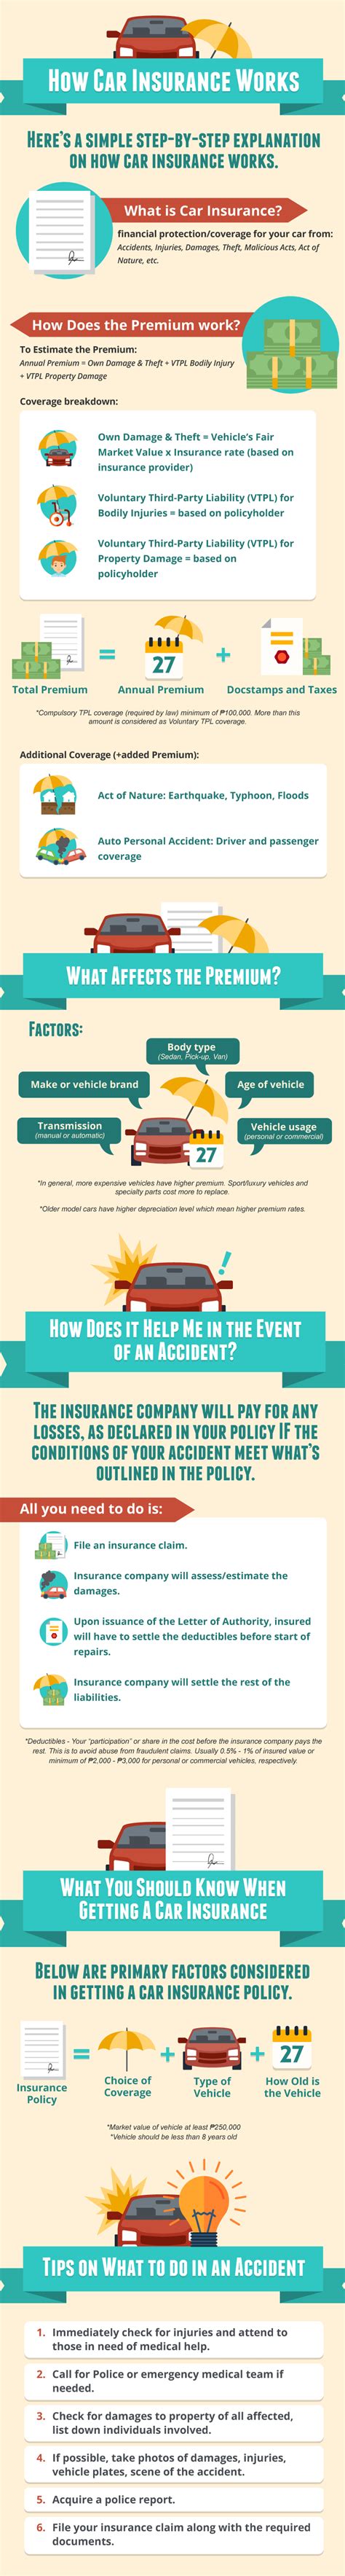 Why do you need travel insurance? Infographic On How Car Insurance Works in the Philippines